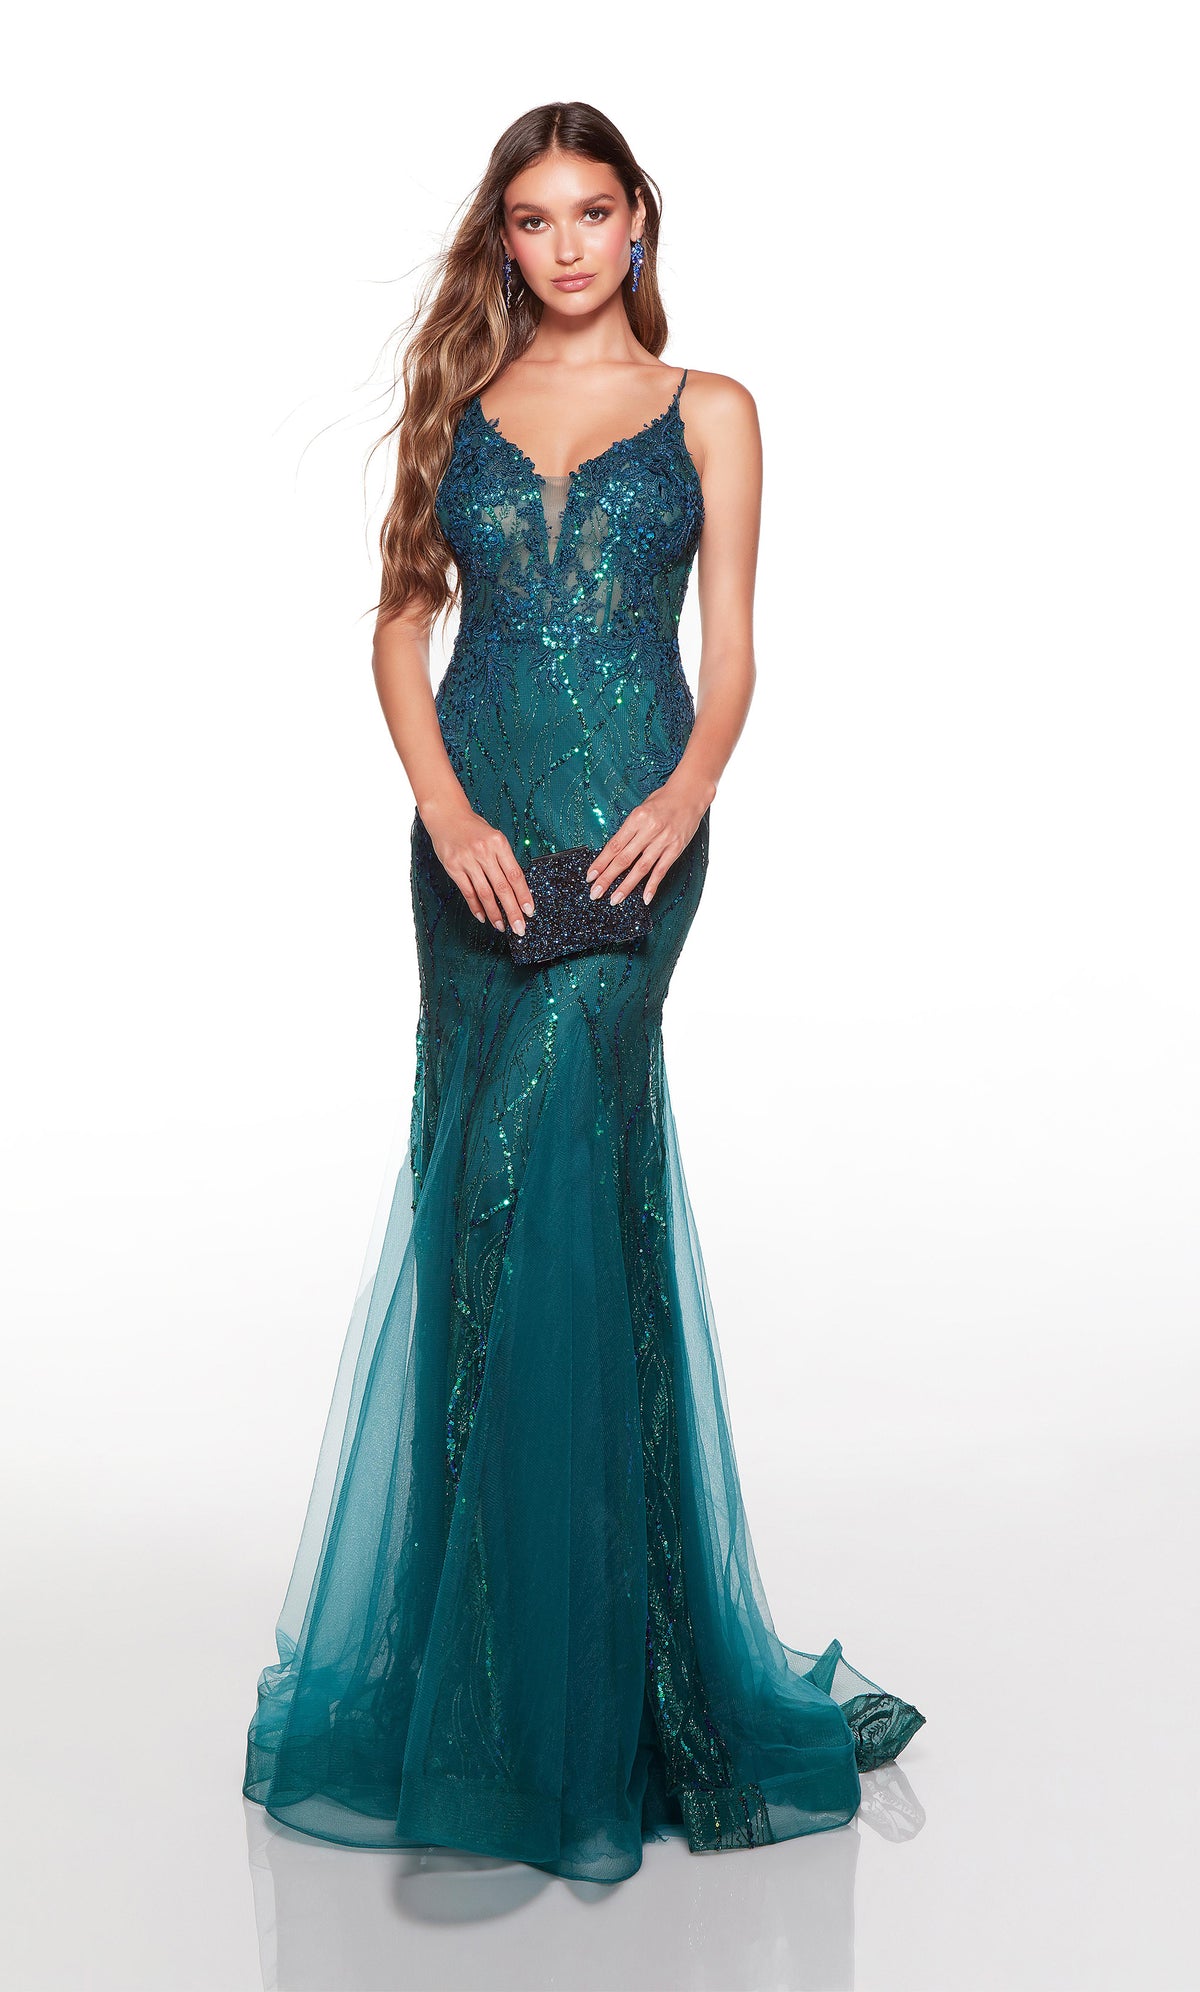 Glitter tulle green prom dress with sheer bodice.